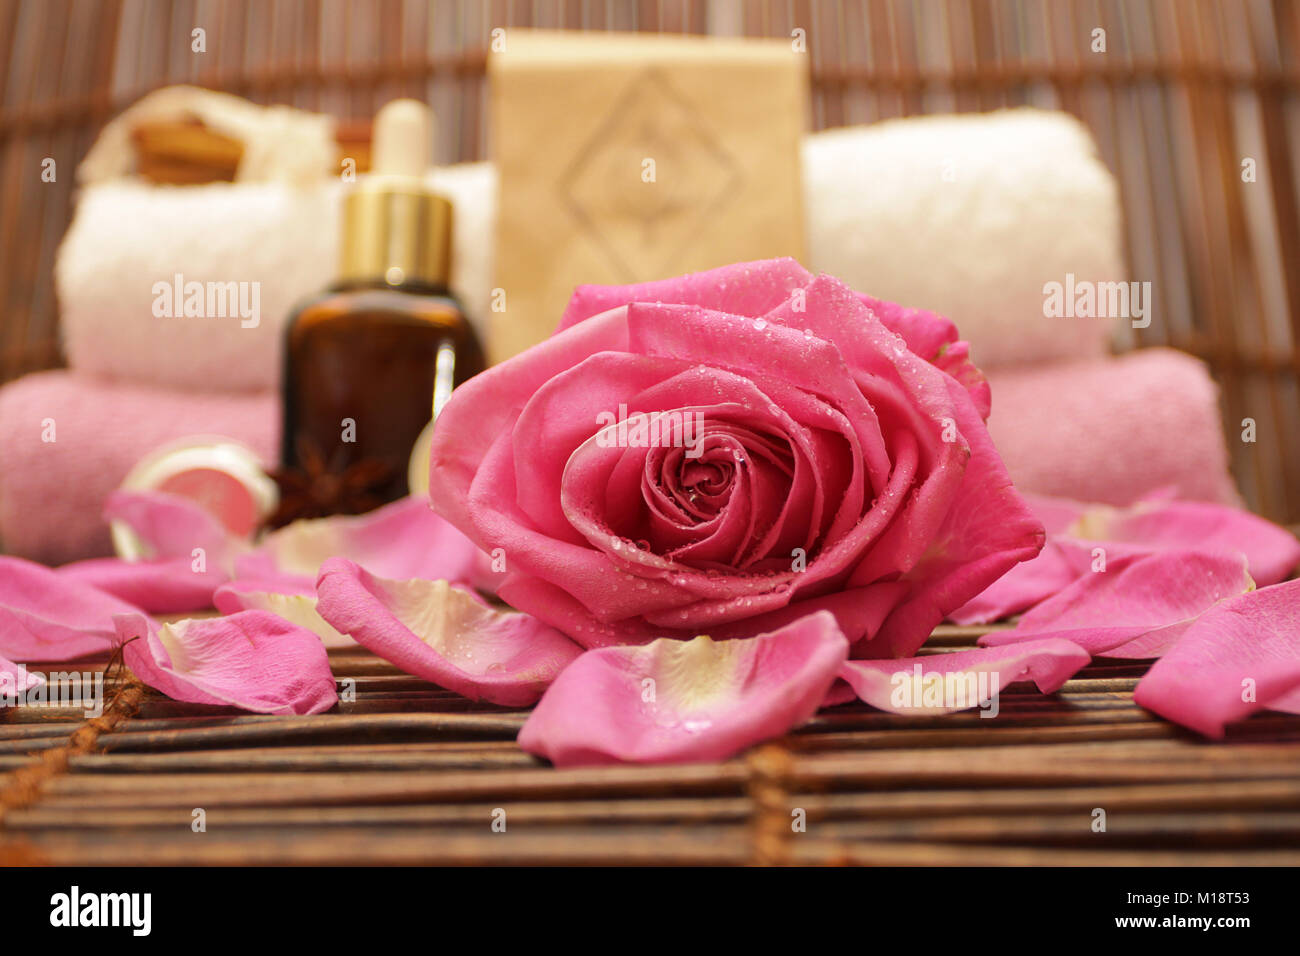 Spa background with rose, cosmetics, accessories Stock Photo